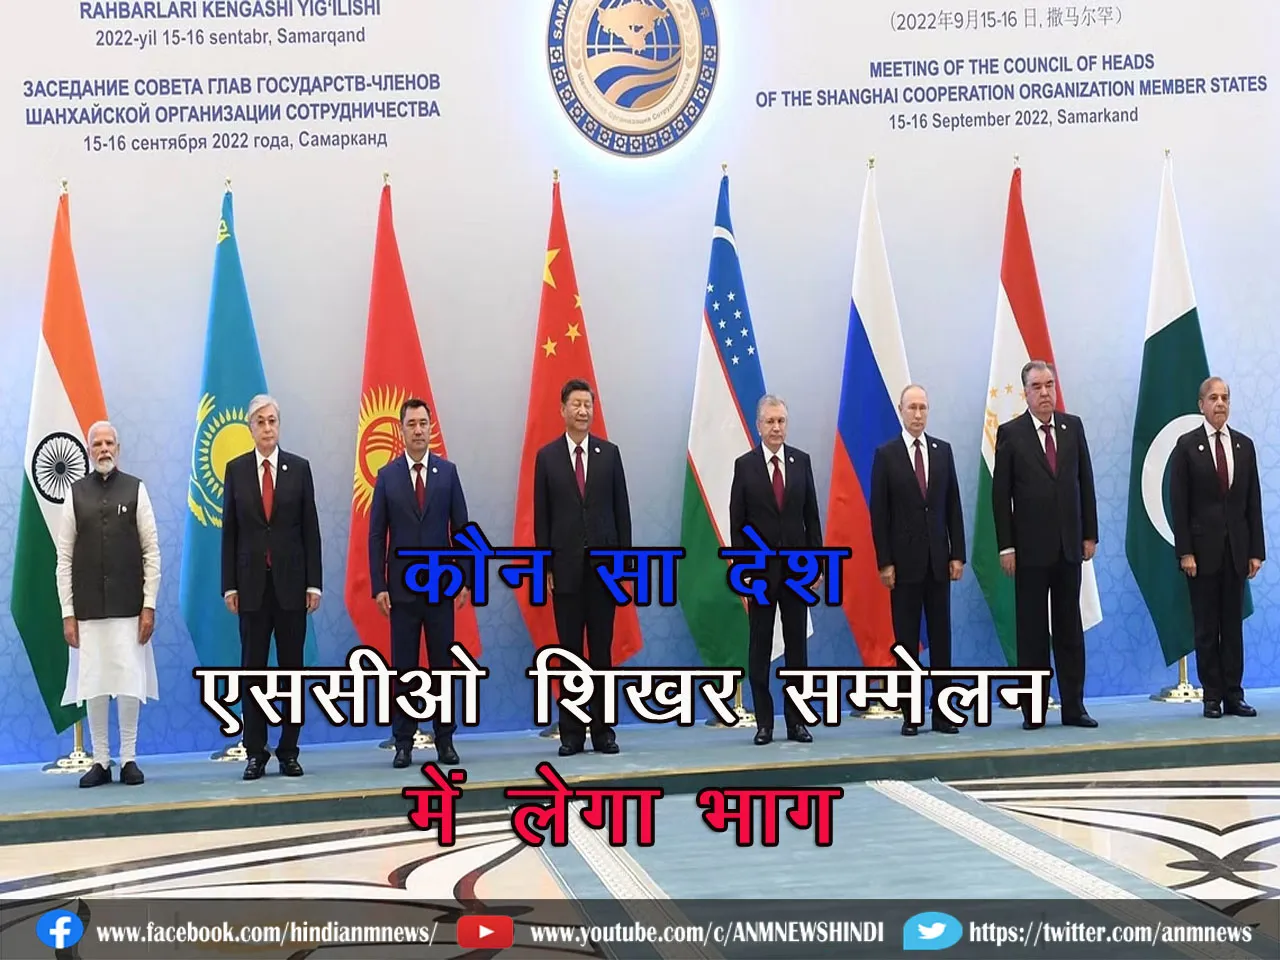 Countries in SCO Summit